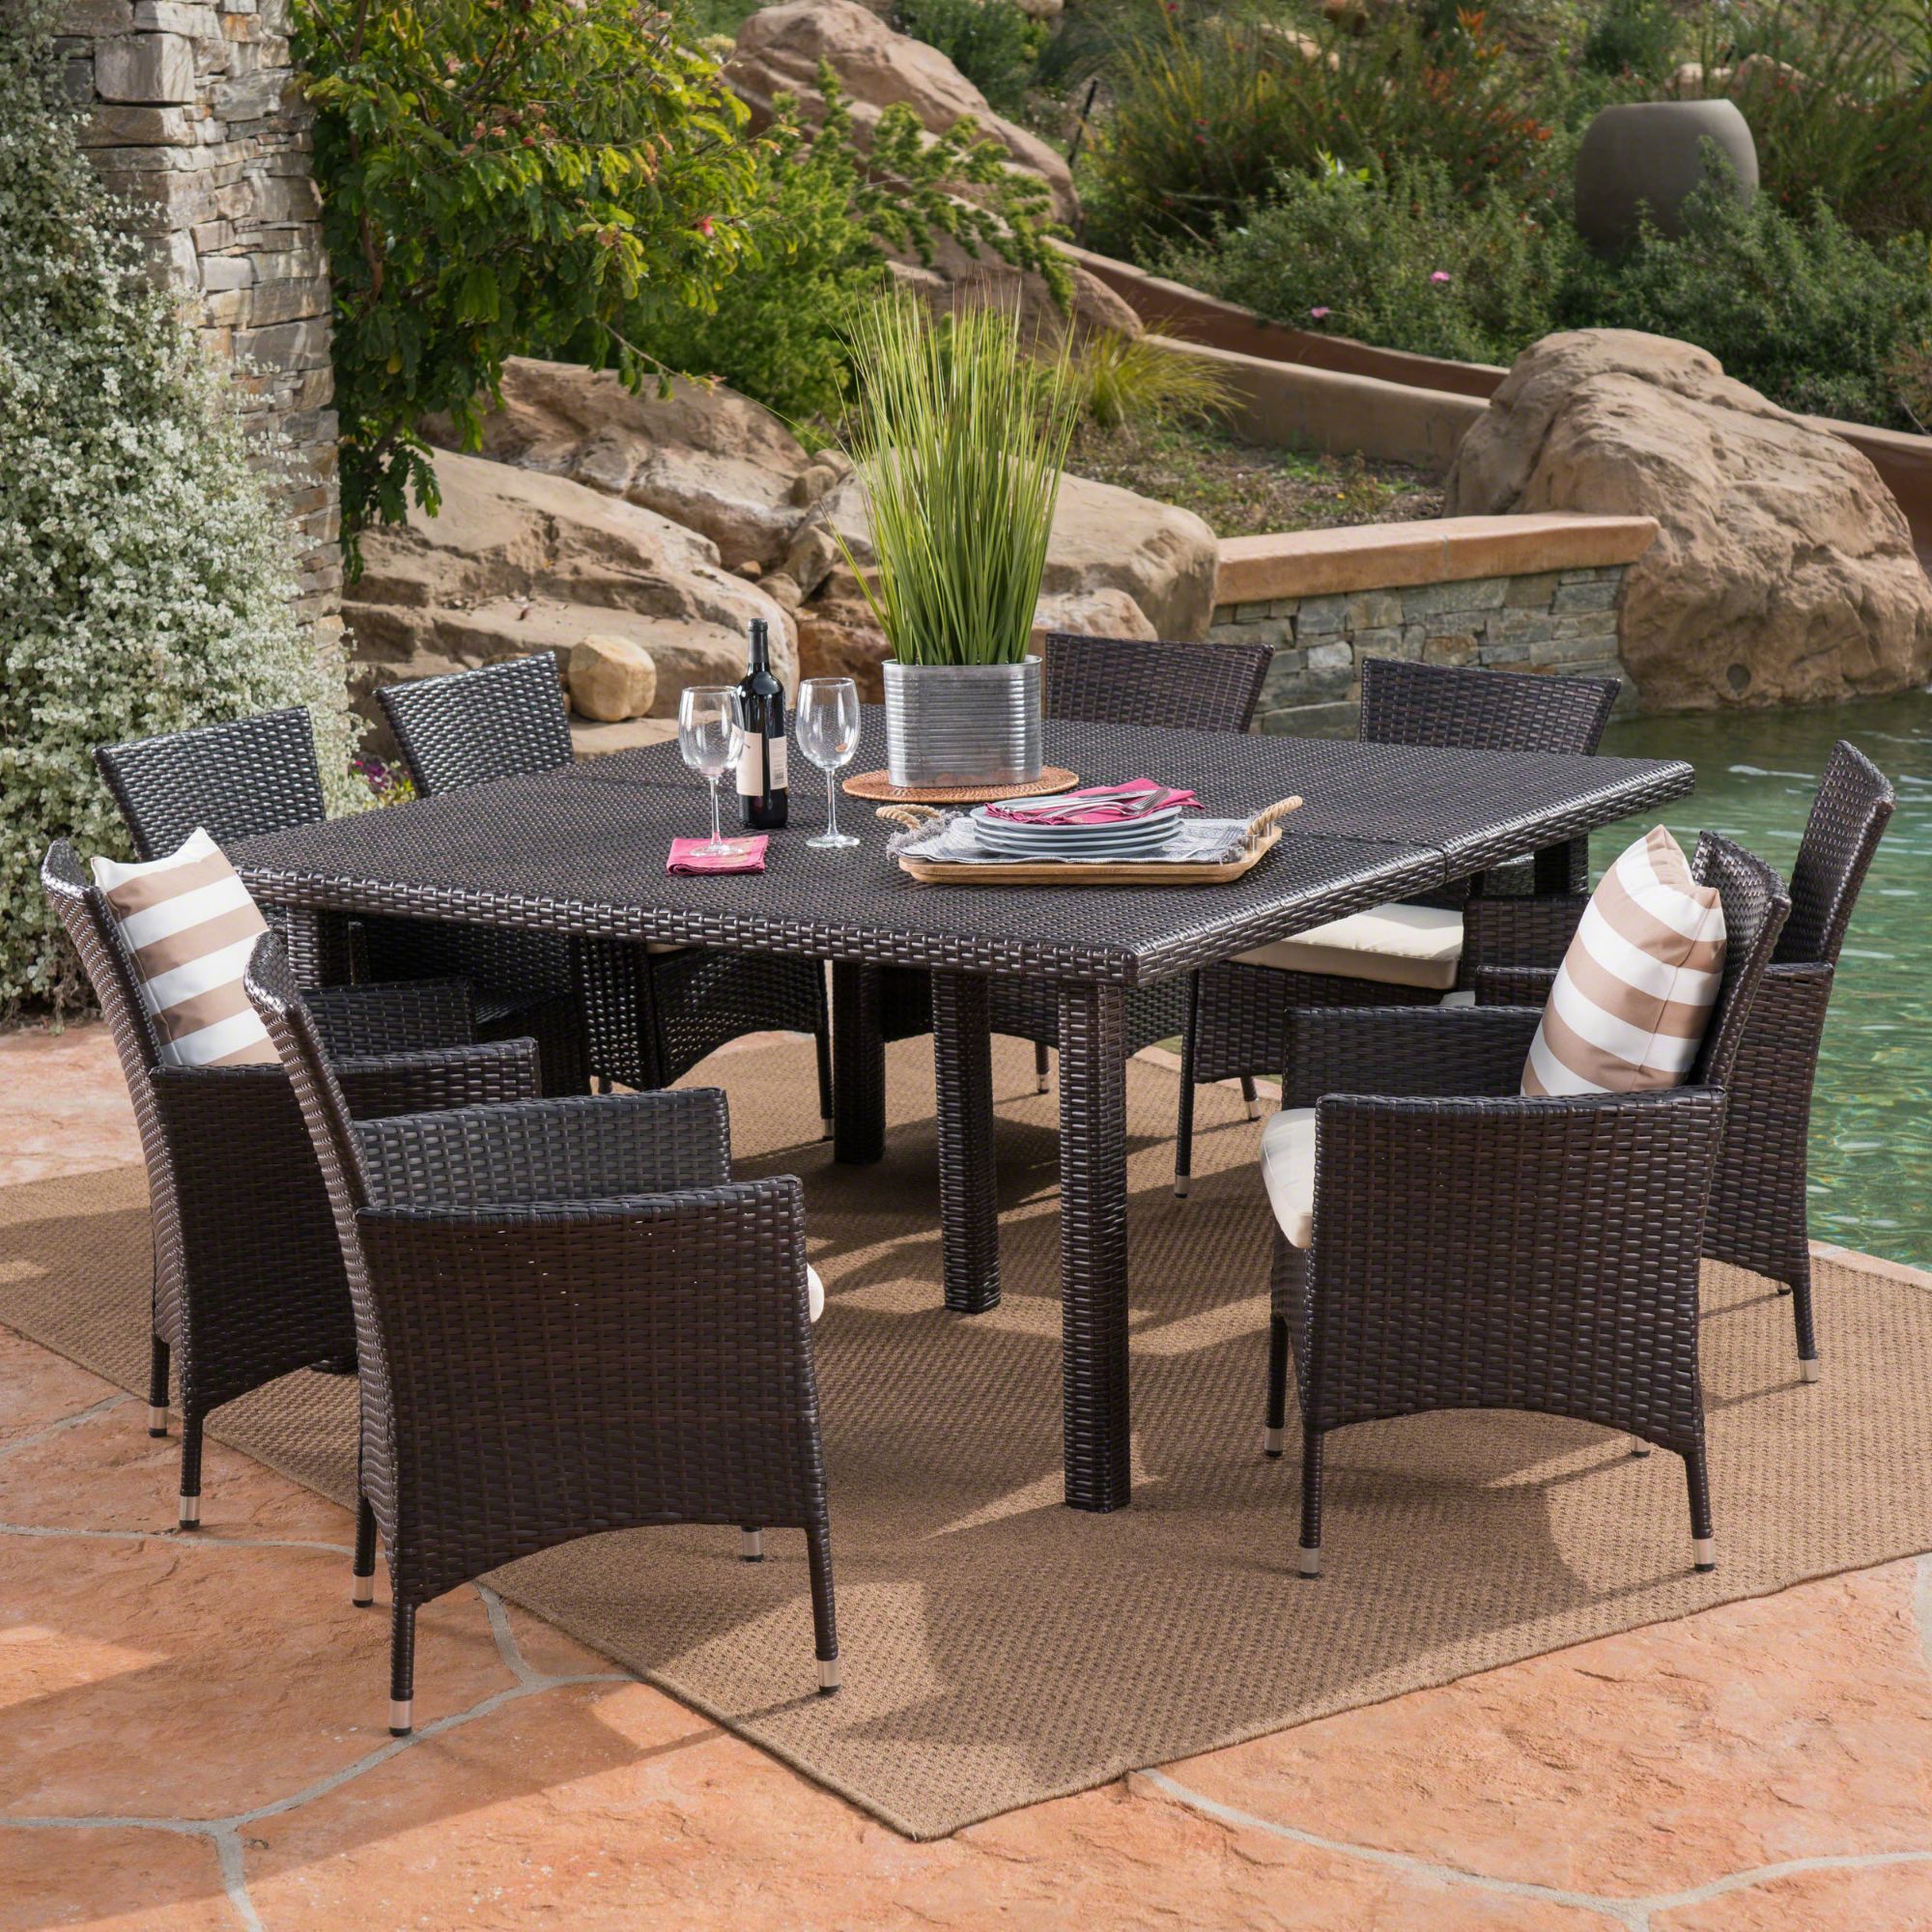 9 Piece Square Patio Dining Sets Within Preferred 9 Piece Brown Finish Square Wicker Outdoor Furniture Patio Dining Set (View 1 of 15)